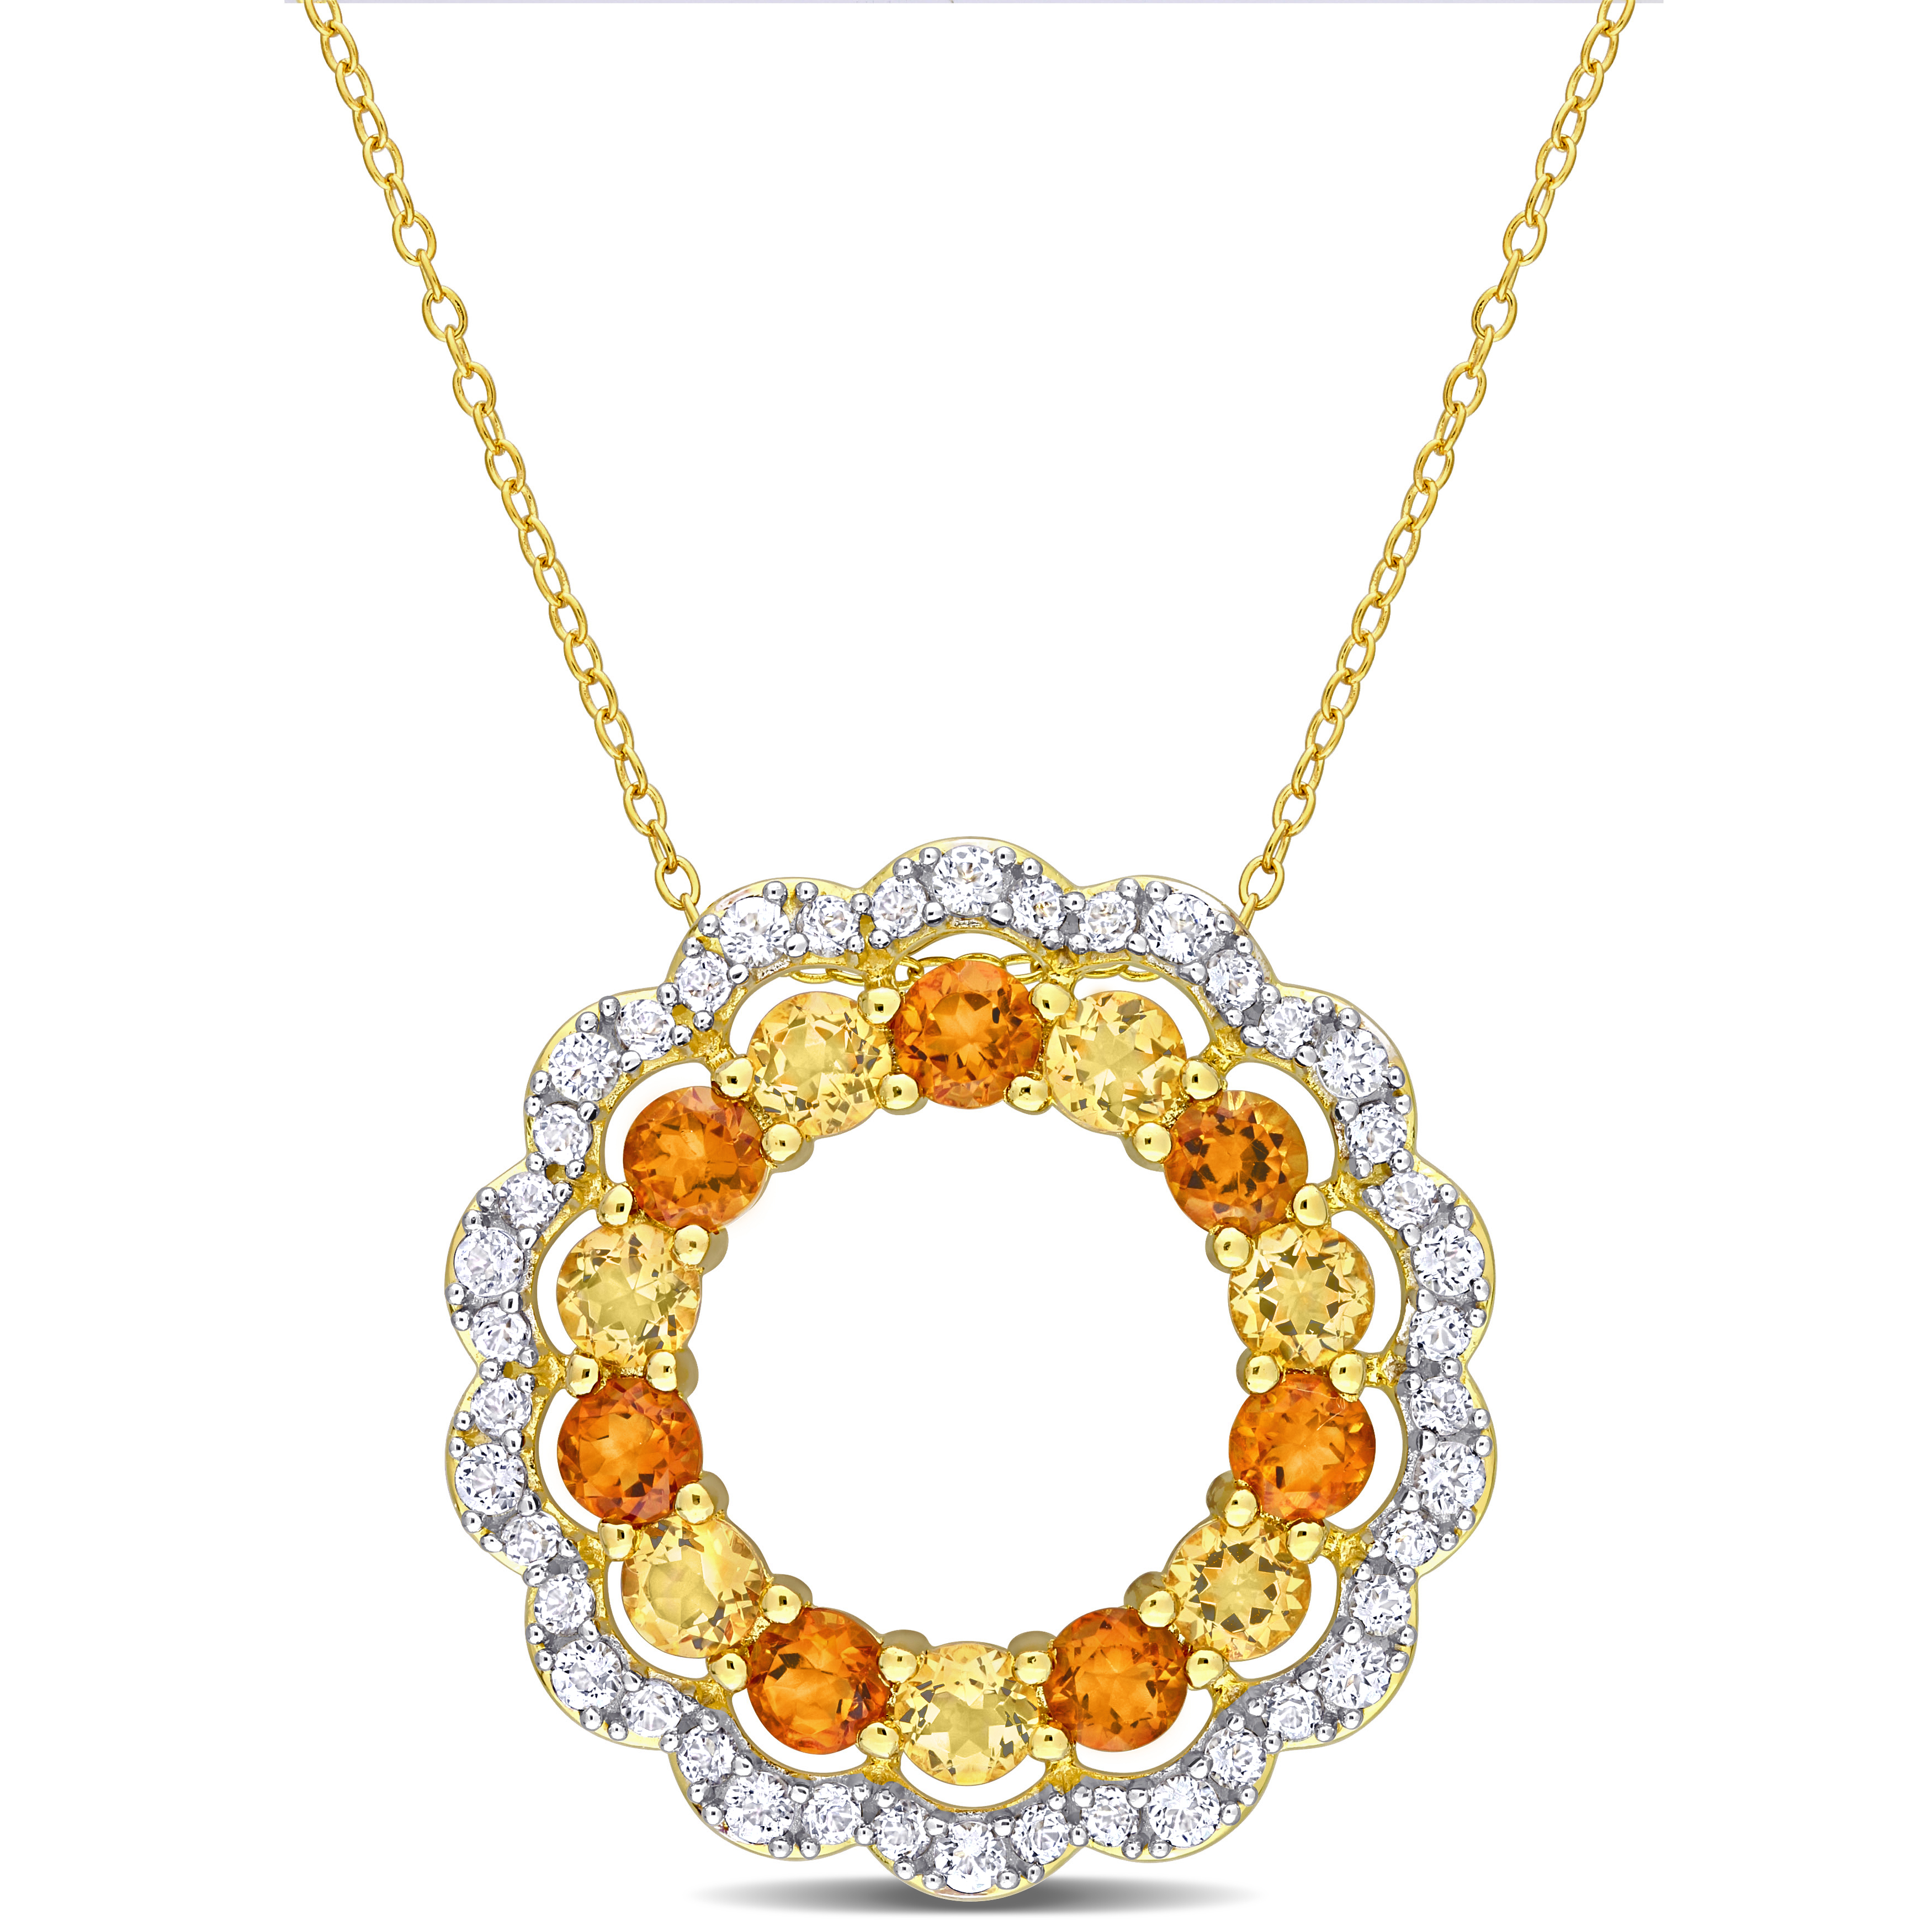 5 7/8 CT TGW Citrine and Madeira Citrine Graduated Open Floral Halo Pendant and Chain in 18k Yellow Gold Plated Sterling Silver